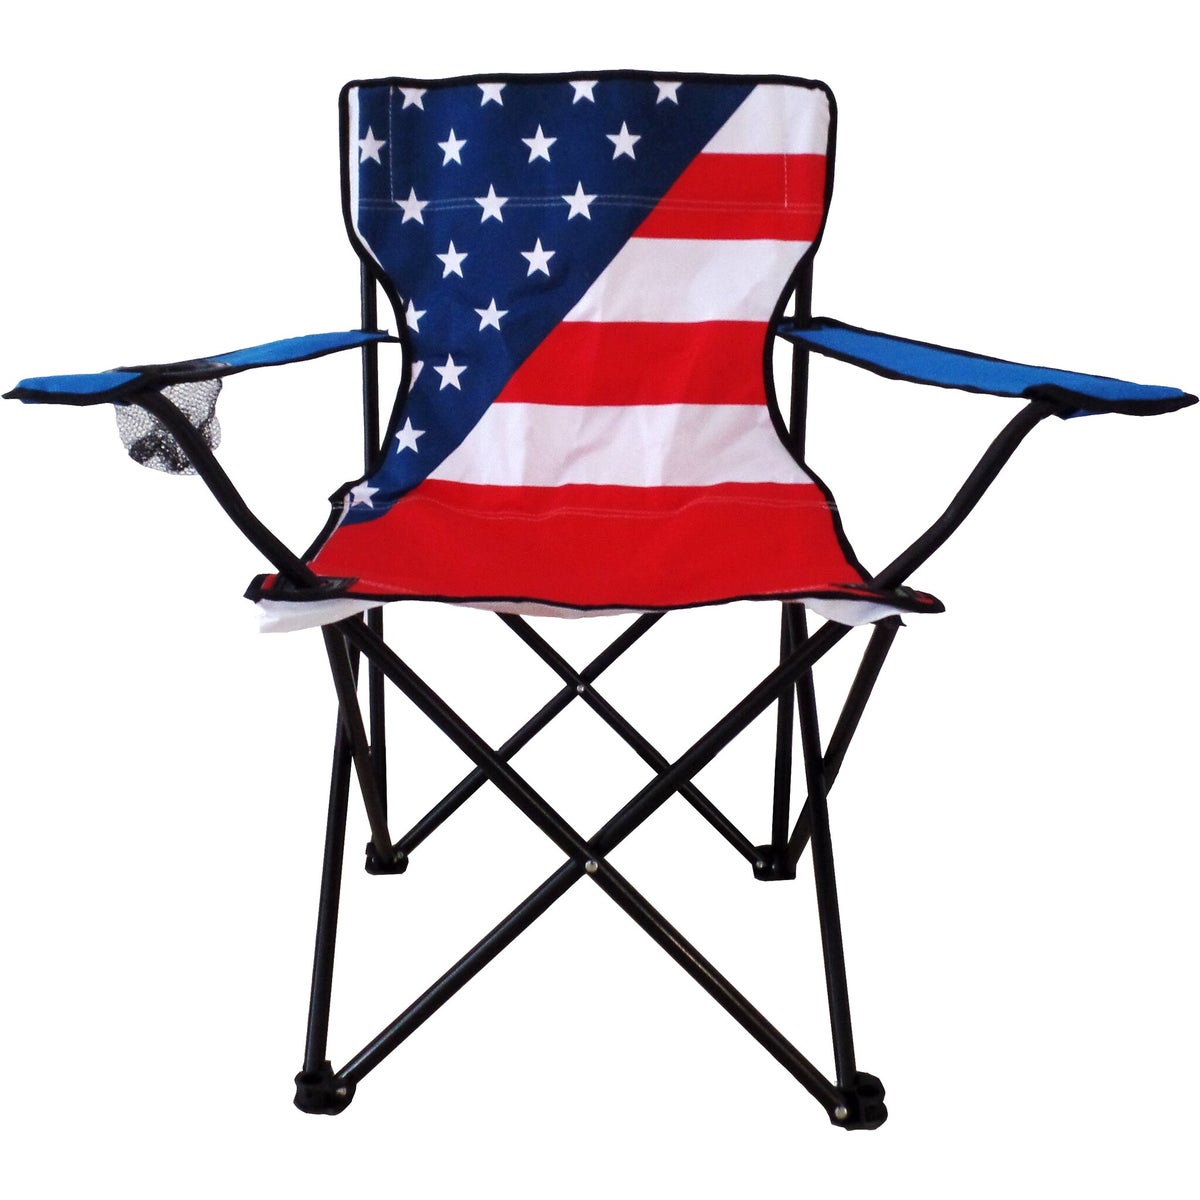 USA - Large Camping Chair (6)